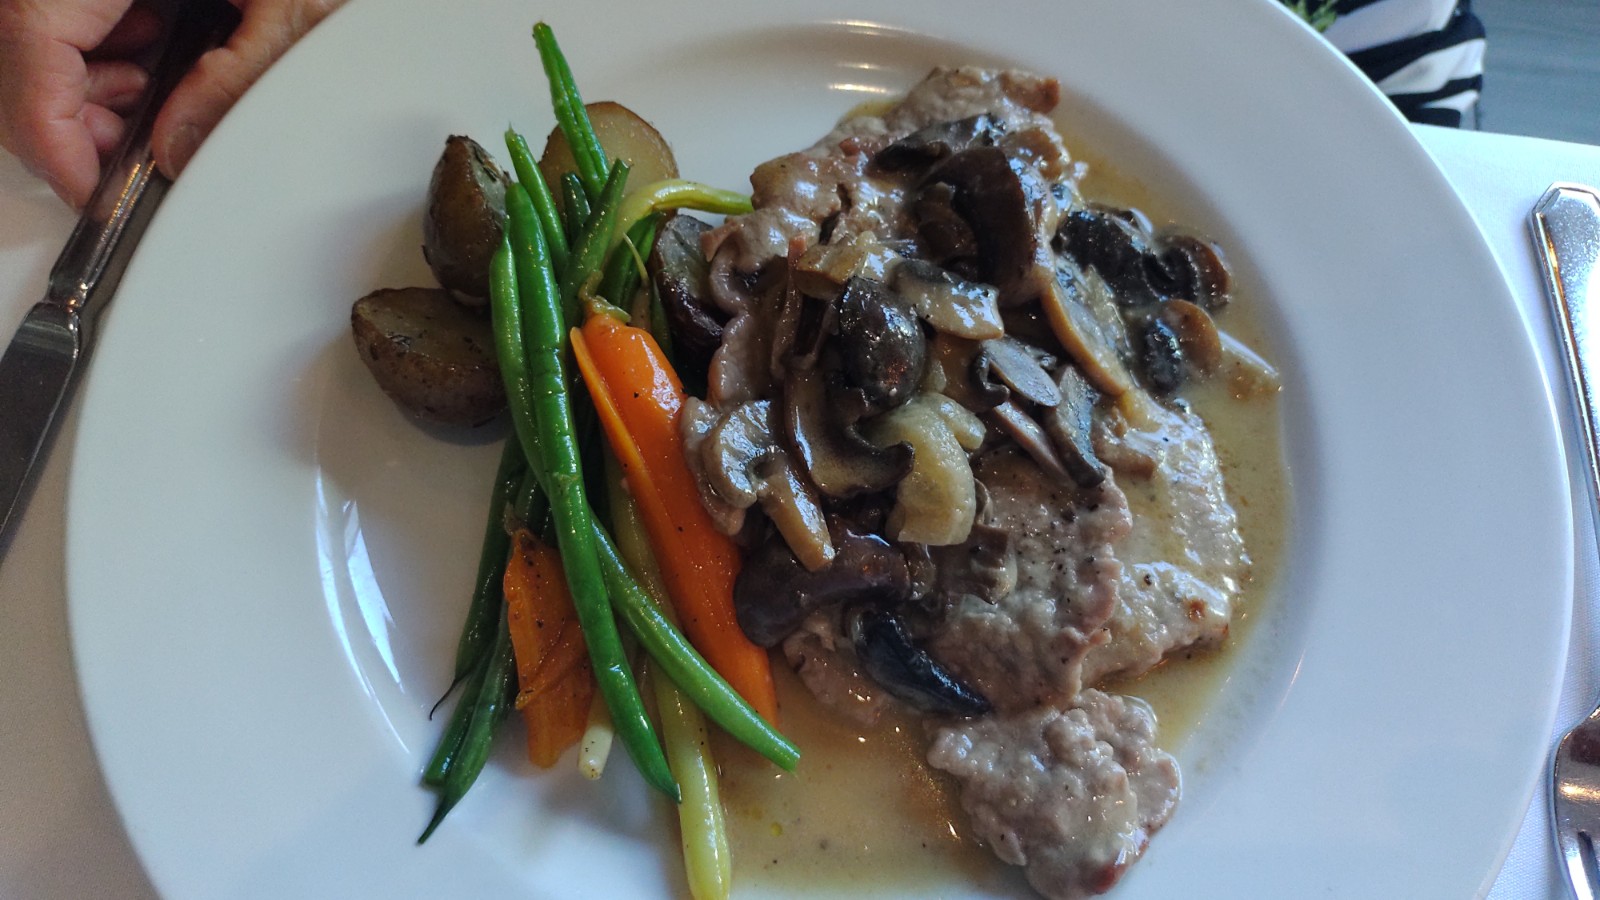 A picure of the  veal scaloppine.